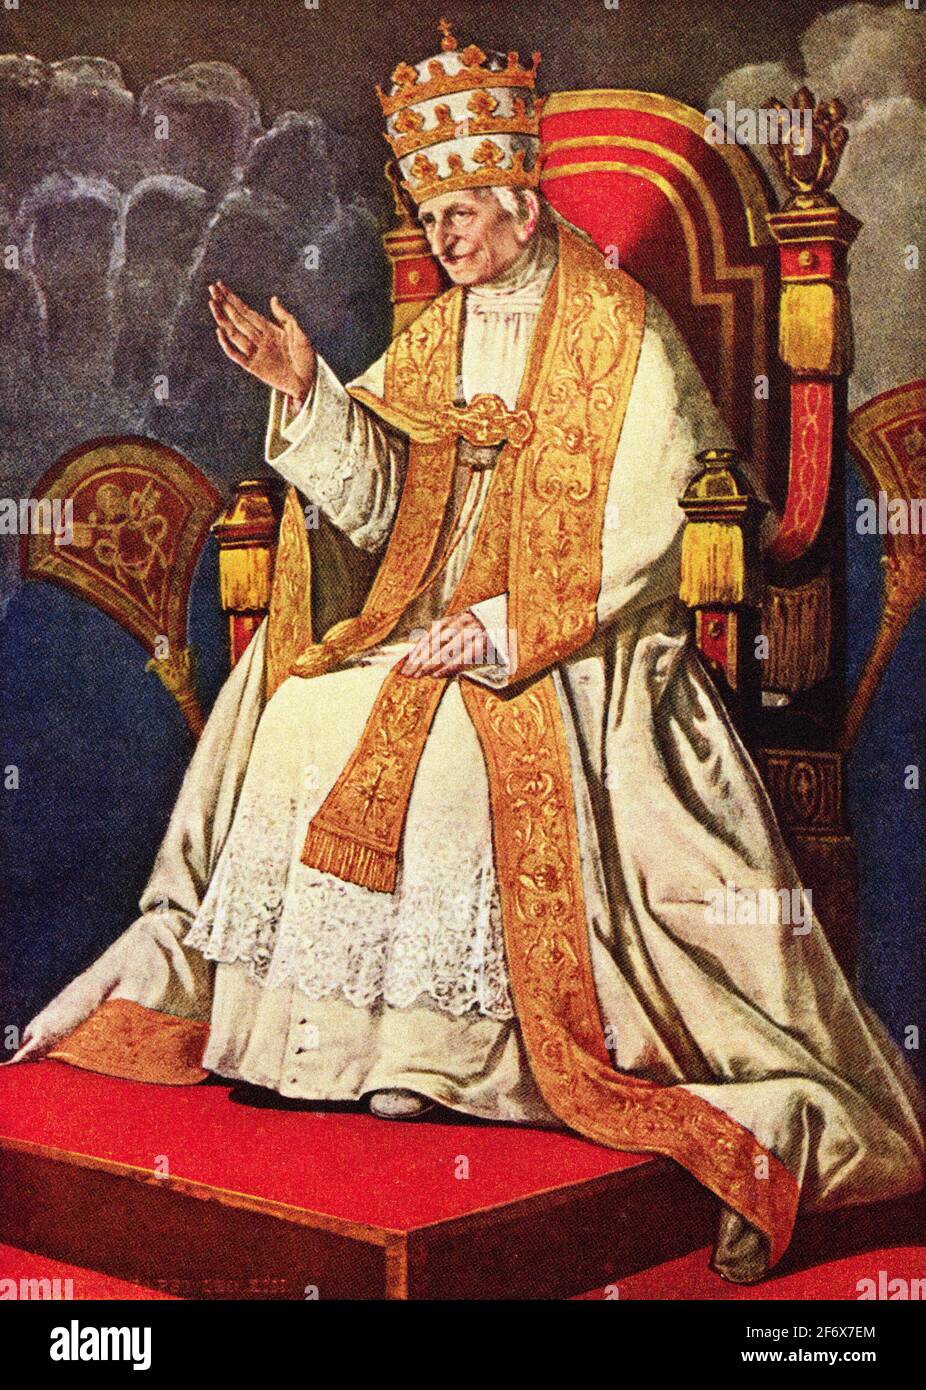 Color portrait of pope Leo XIII, Vincenzo Gioacchino Pecci (1810-1903) Pope of the catholic church from 1878-1903. Italy, Europe Stock Photo